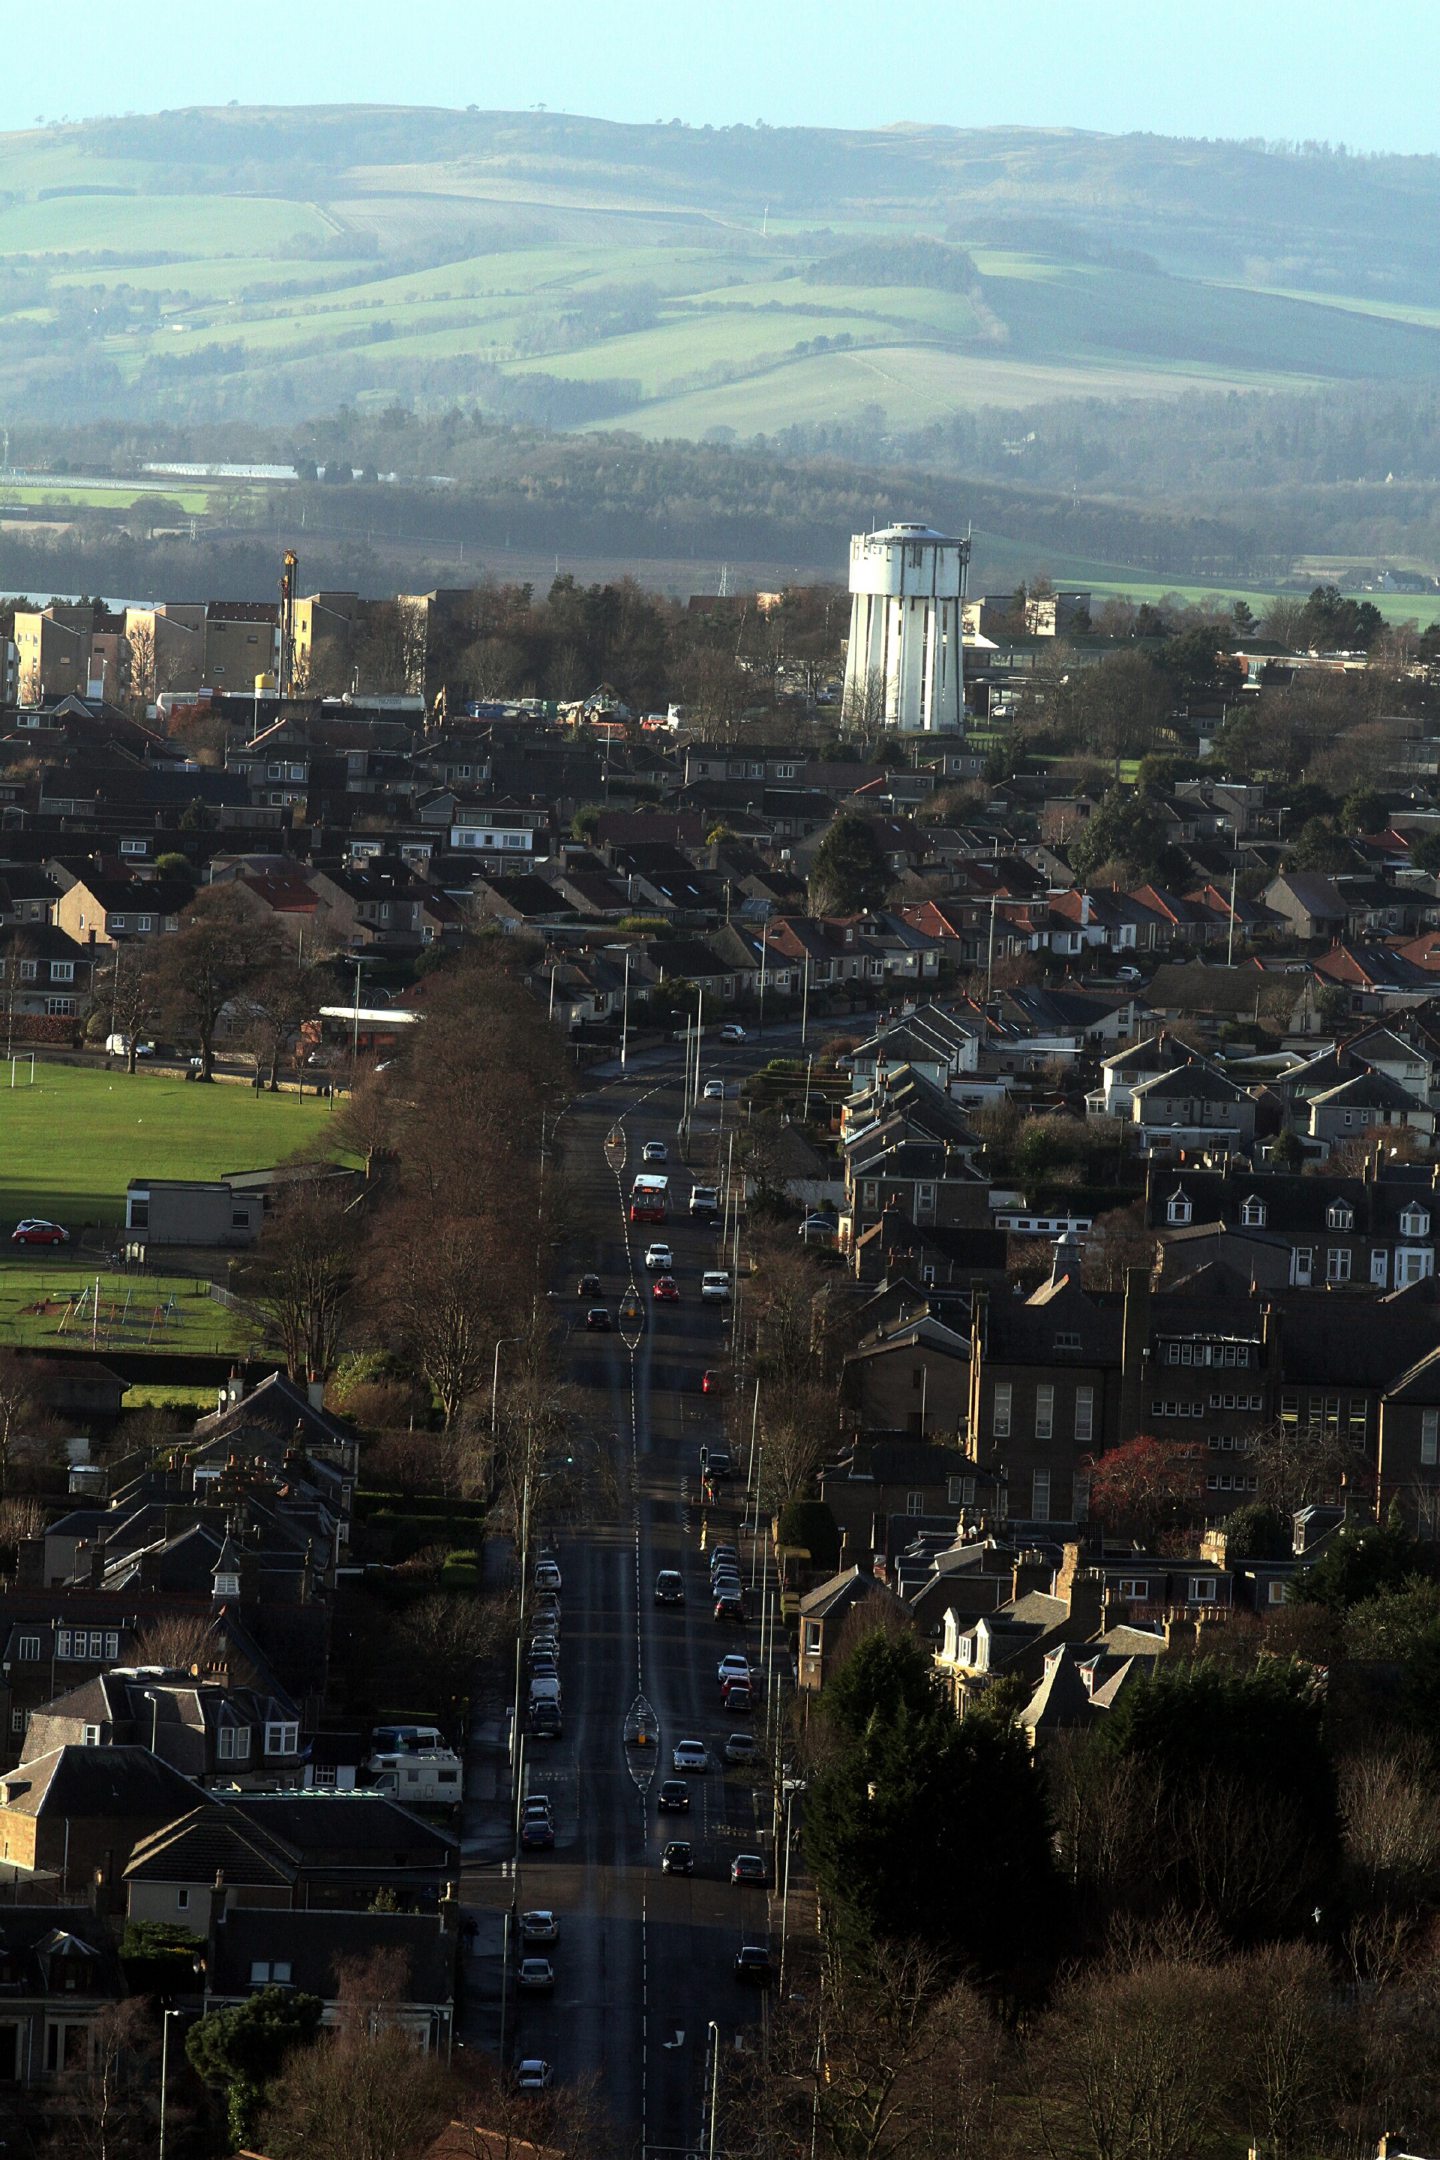 The water tower is visible from most parts of the Menzieshill area.